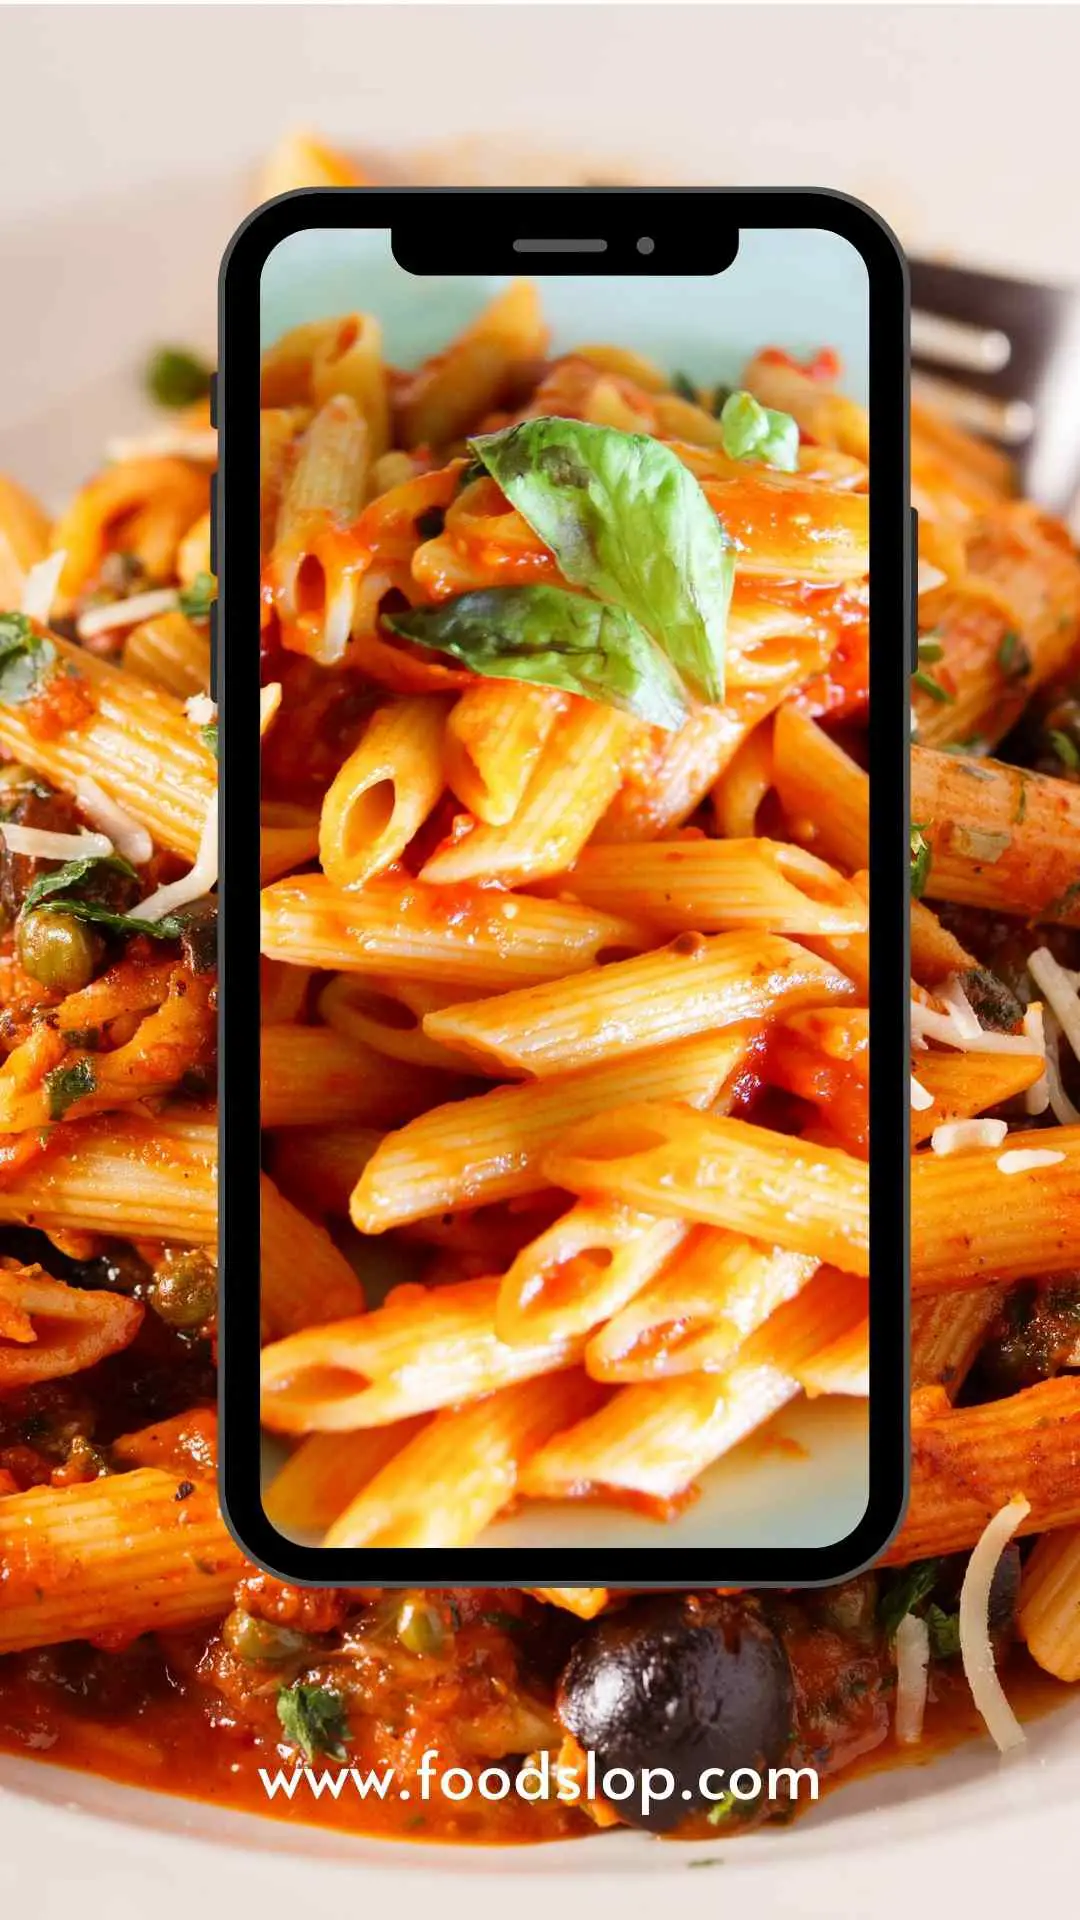 Why Am I Craving Penne?